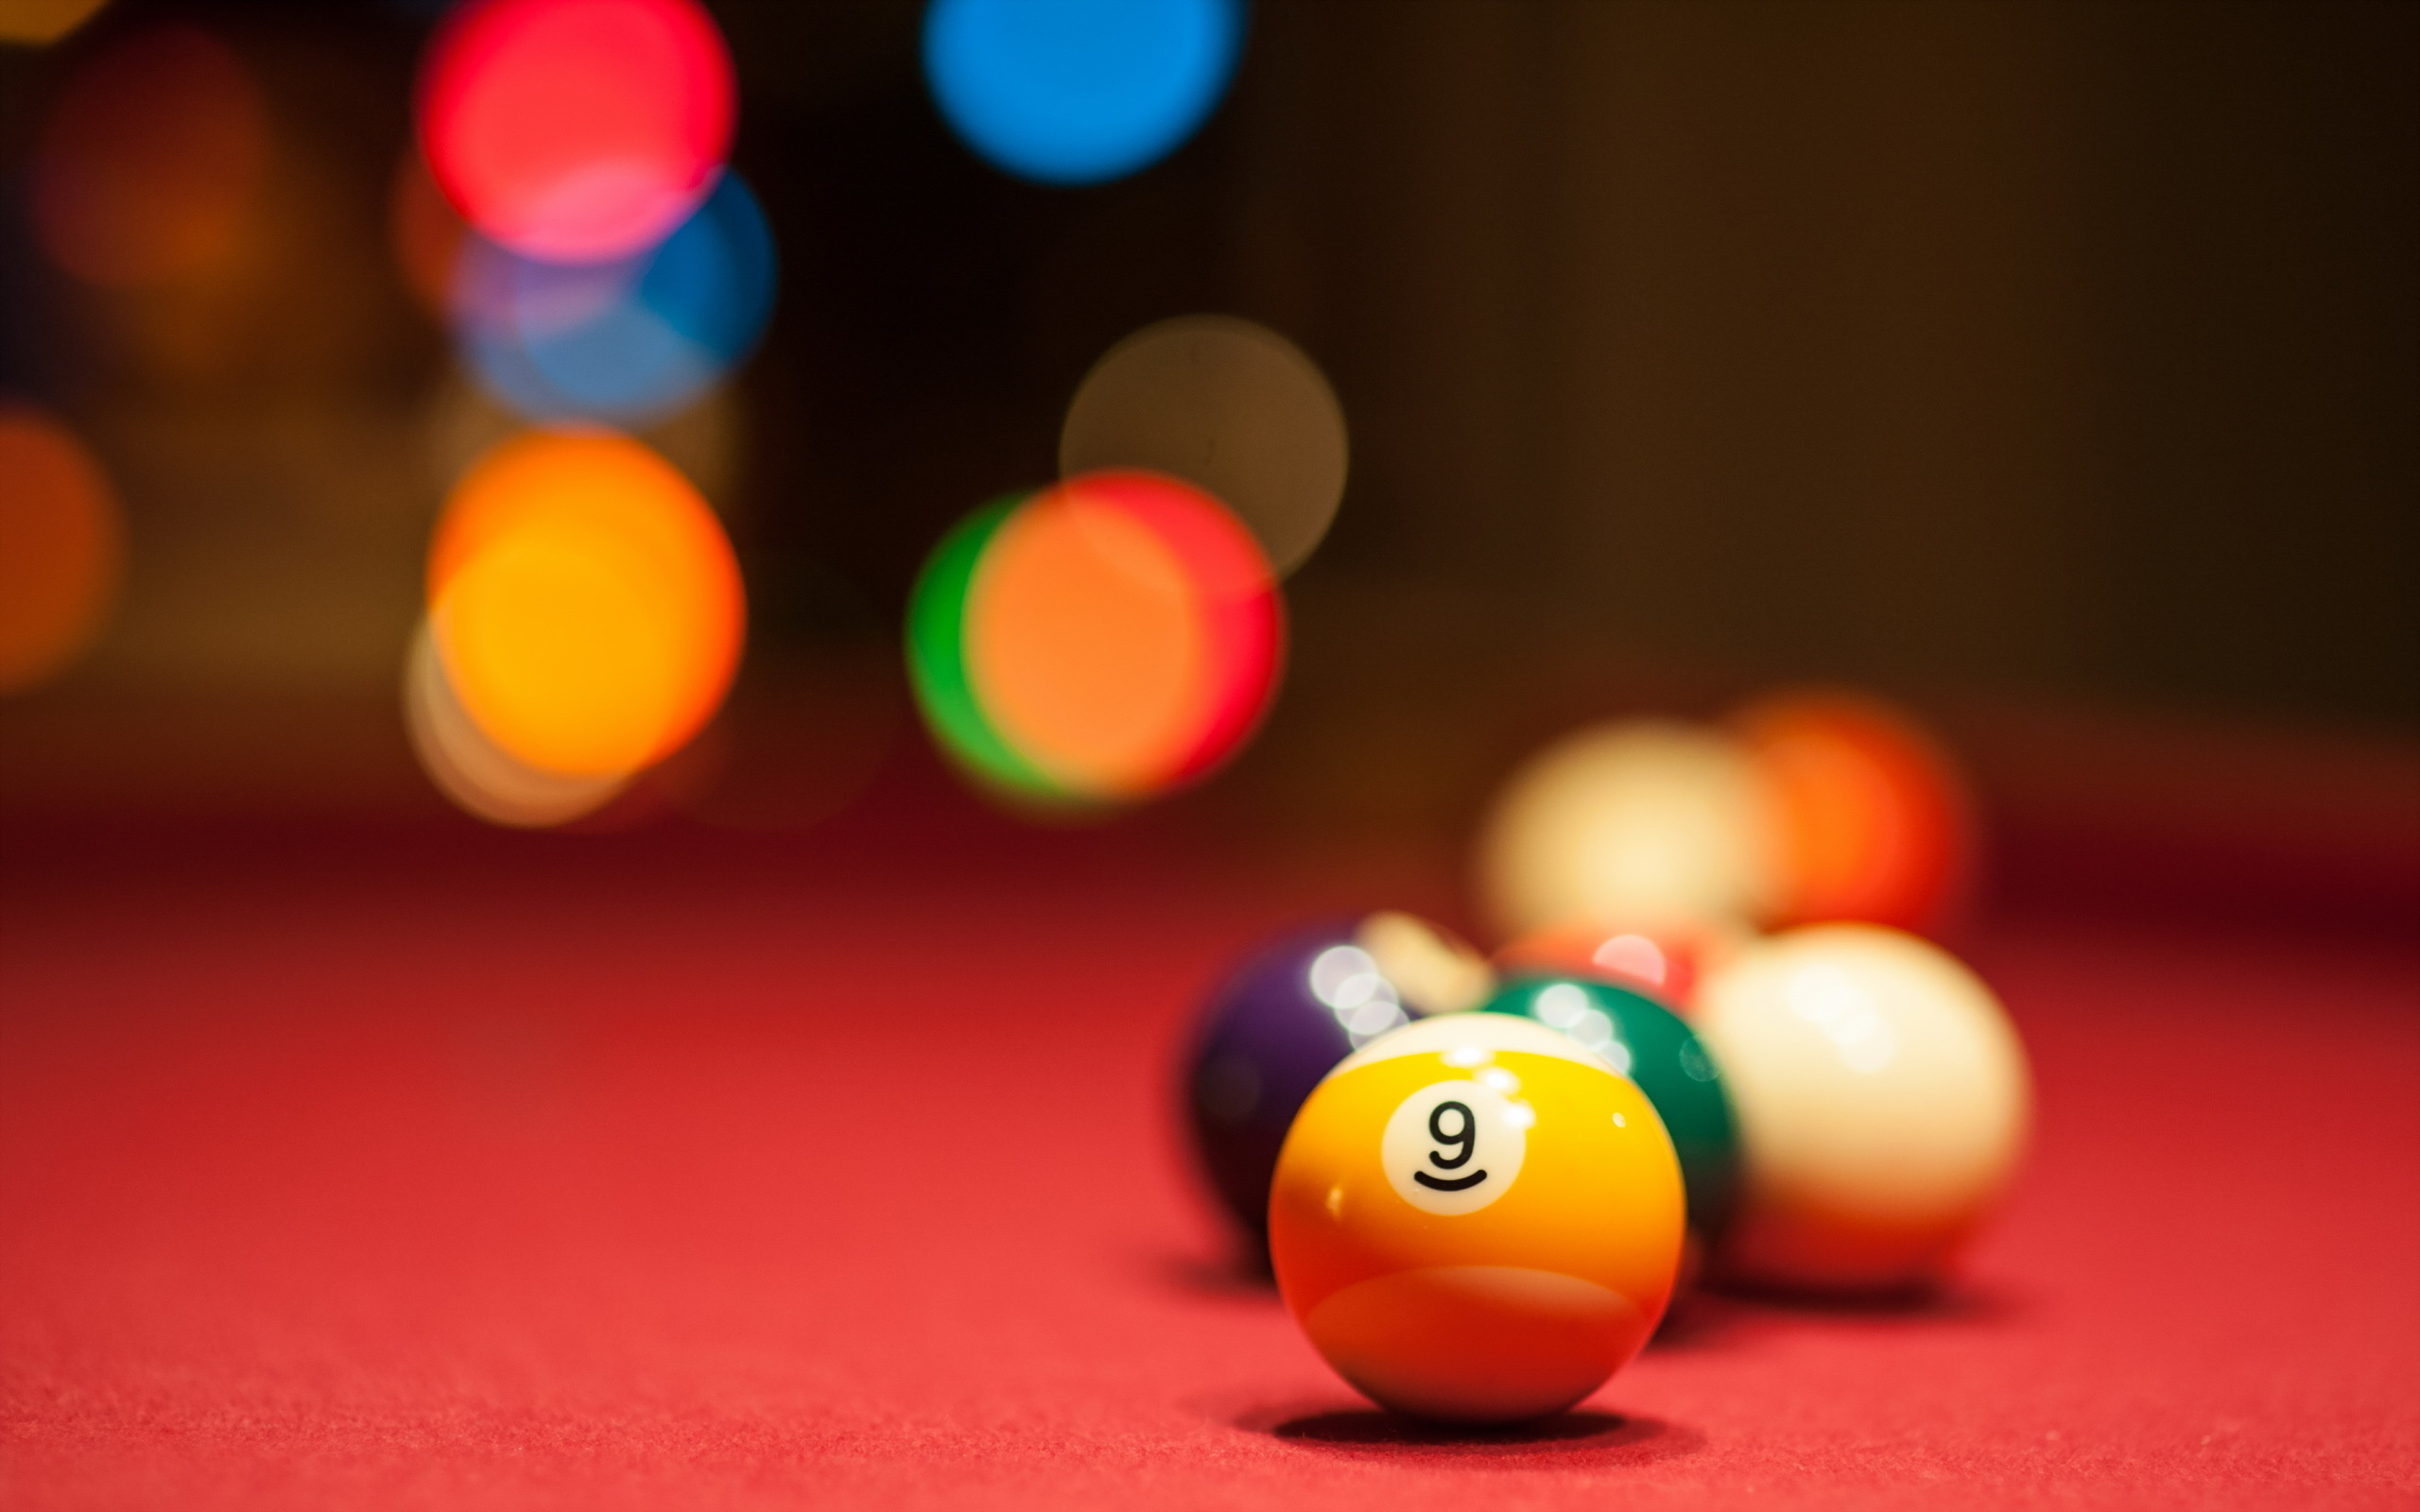 Cue Sports: Object balls after a break shot, Competitive sport and recreational activity. 2560x1600 HD Wallpaper.